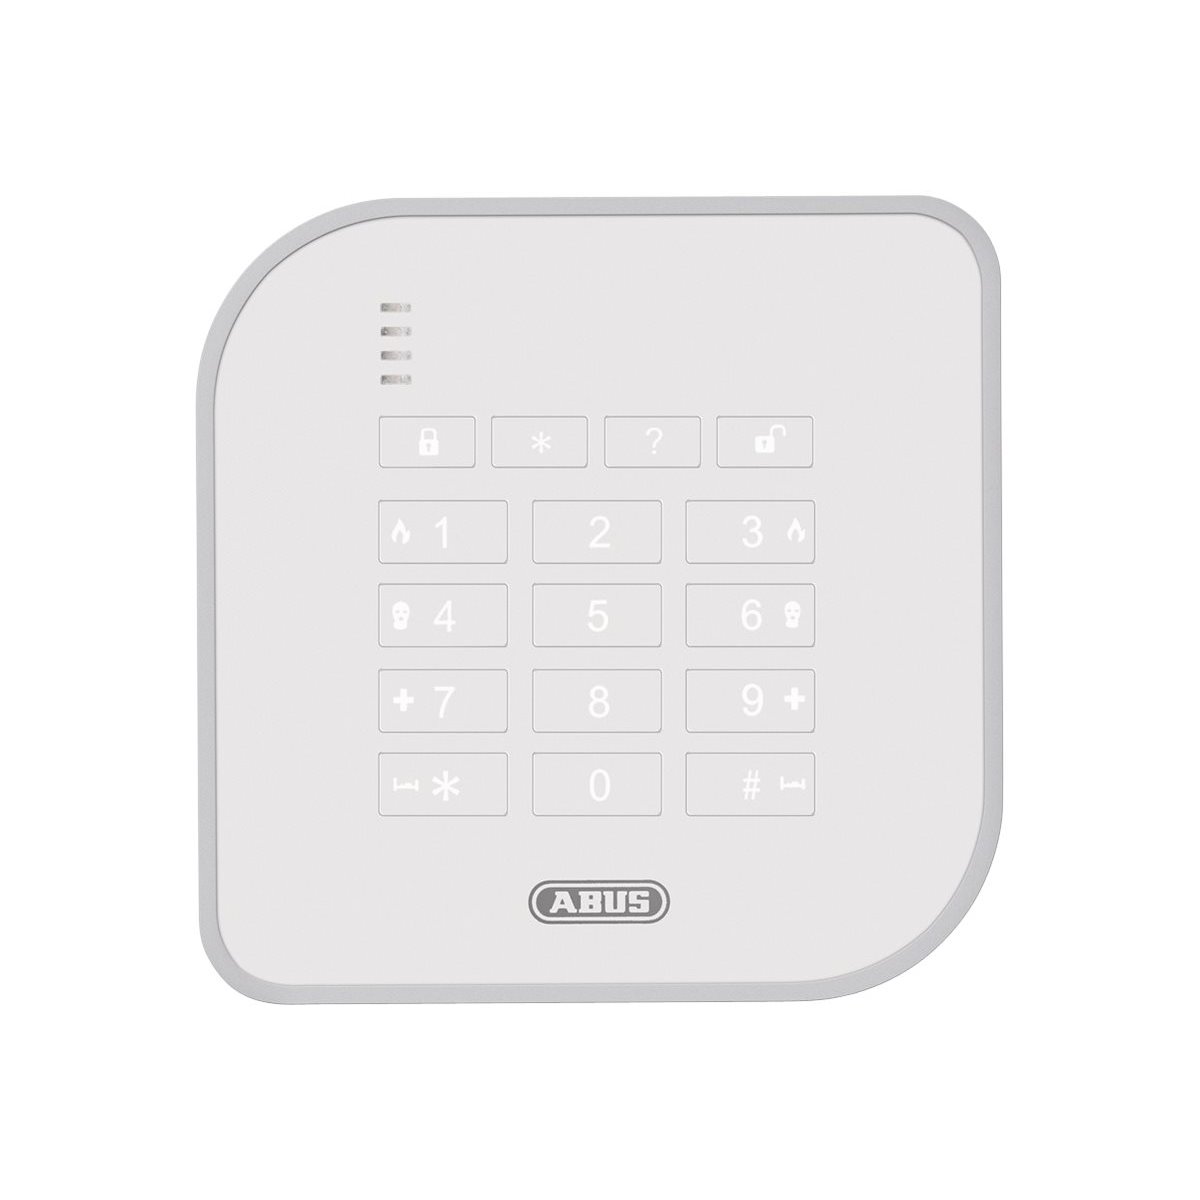 ABUS Security-Center ABUS FUBE50001 - 868.6625 MHz - White - 0 - 95% - 120 mm - 30 mm - 120 mm